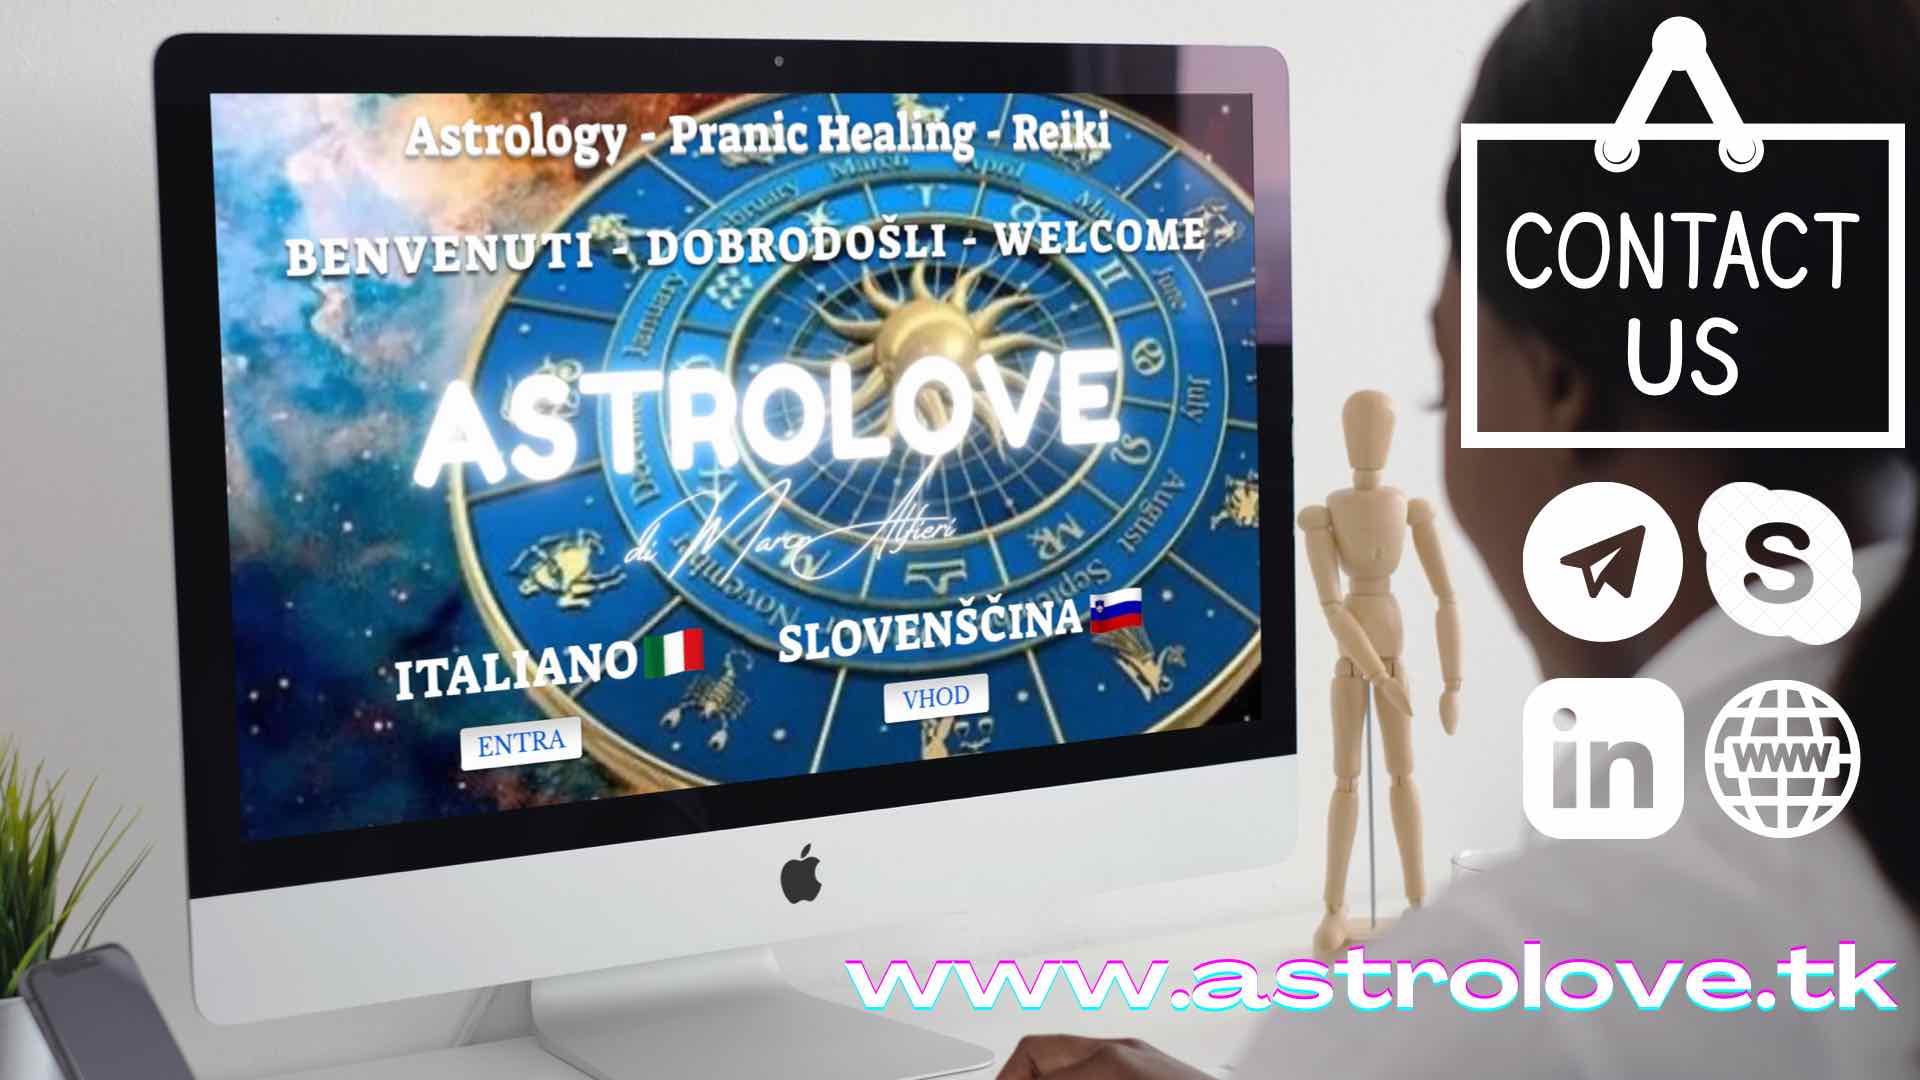 Official Web Site: www.astrolove.tk